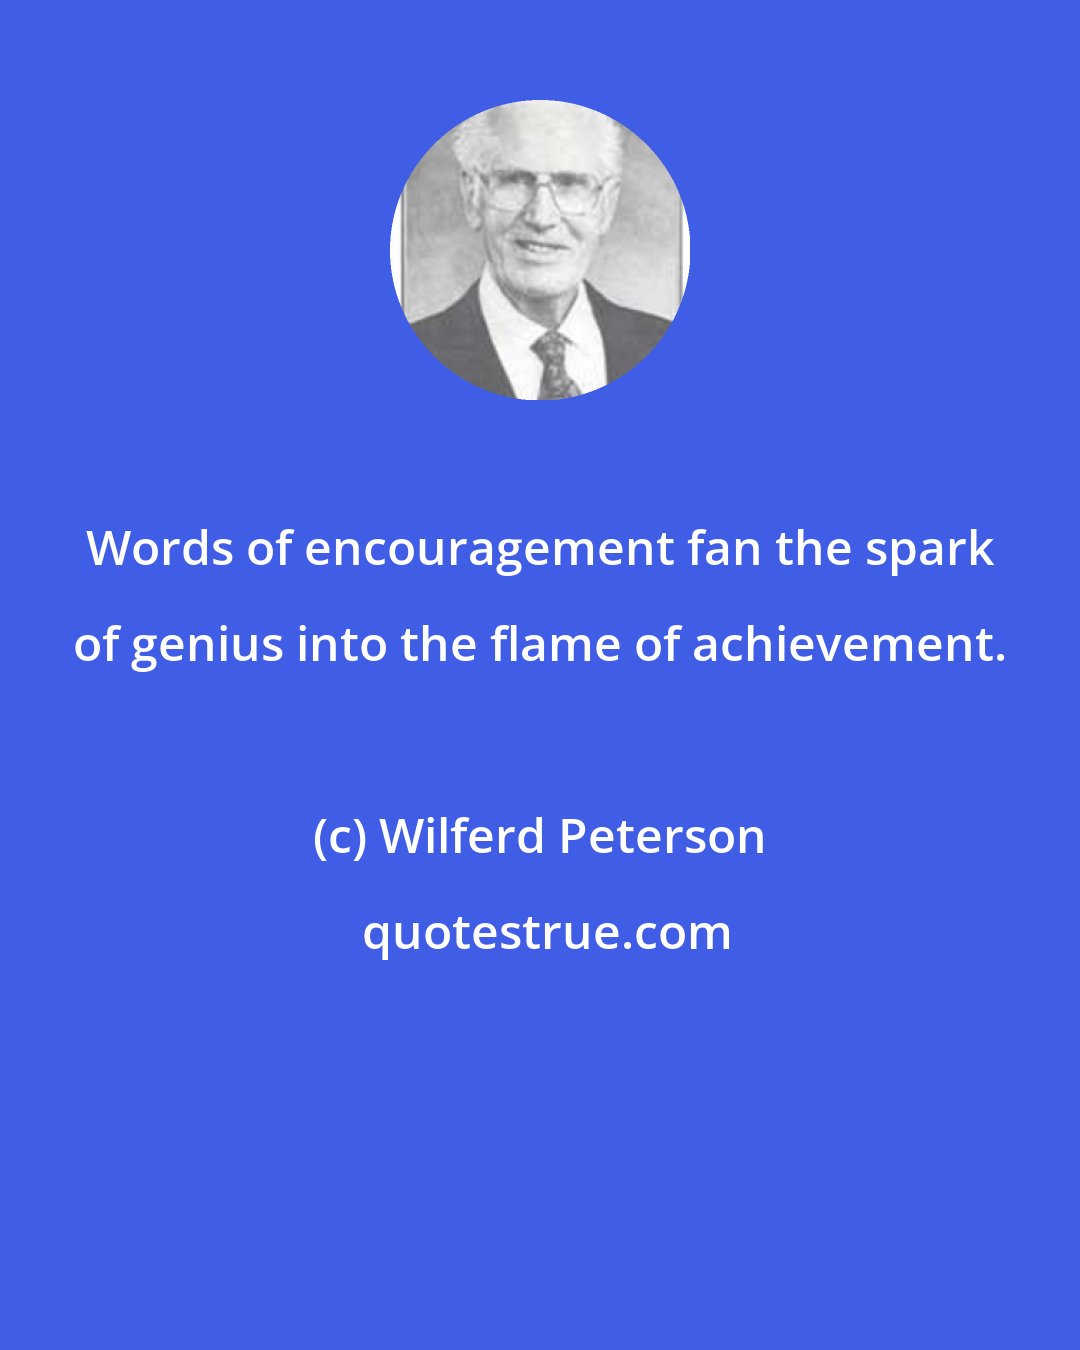 Wilferd Peterson: Words of encouragement fan the spark of genius into the flame of achievement.